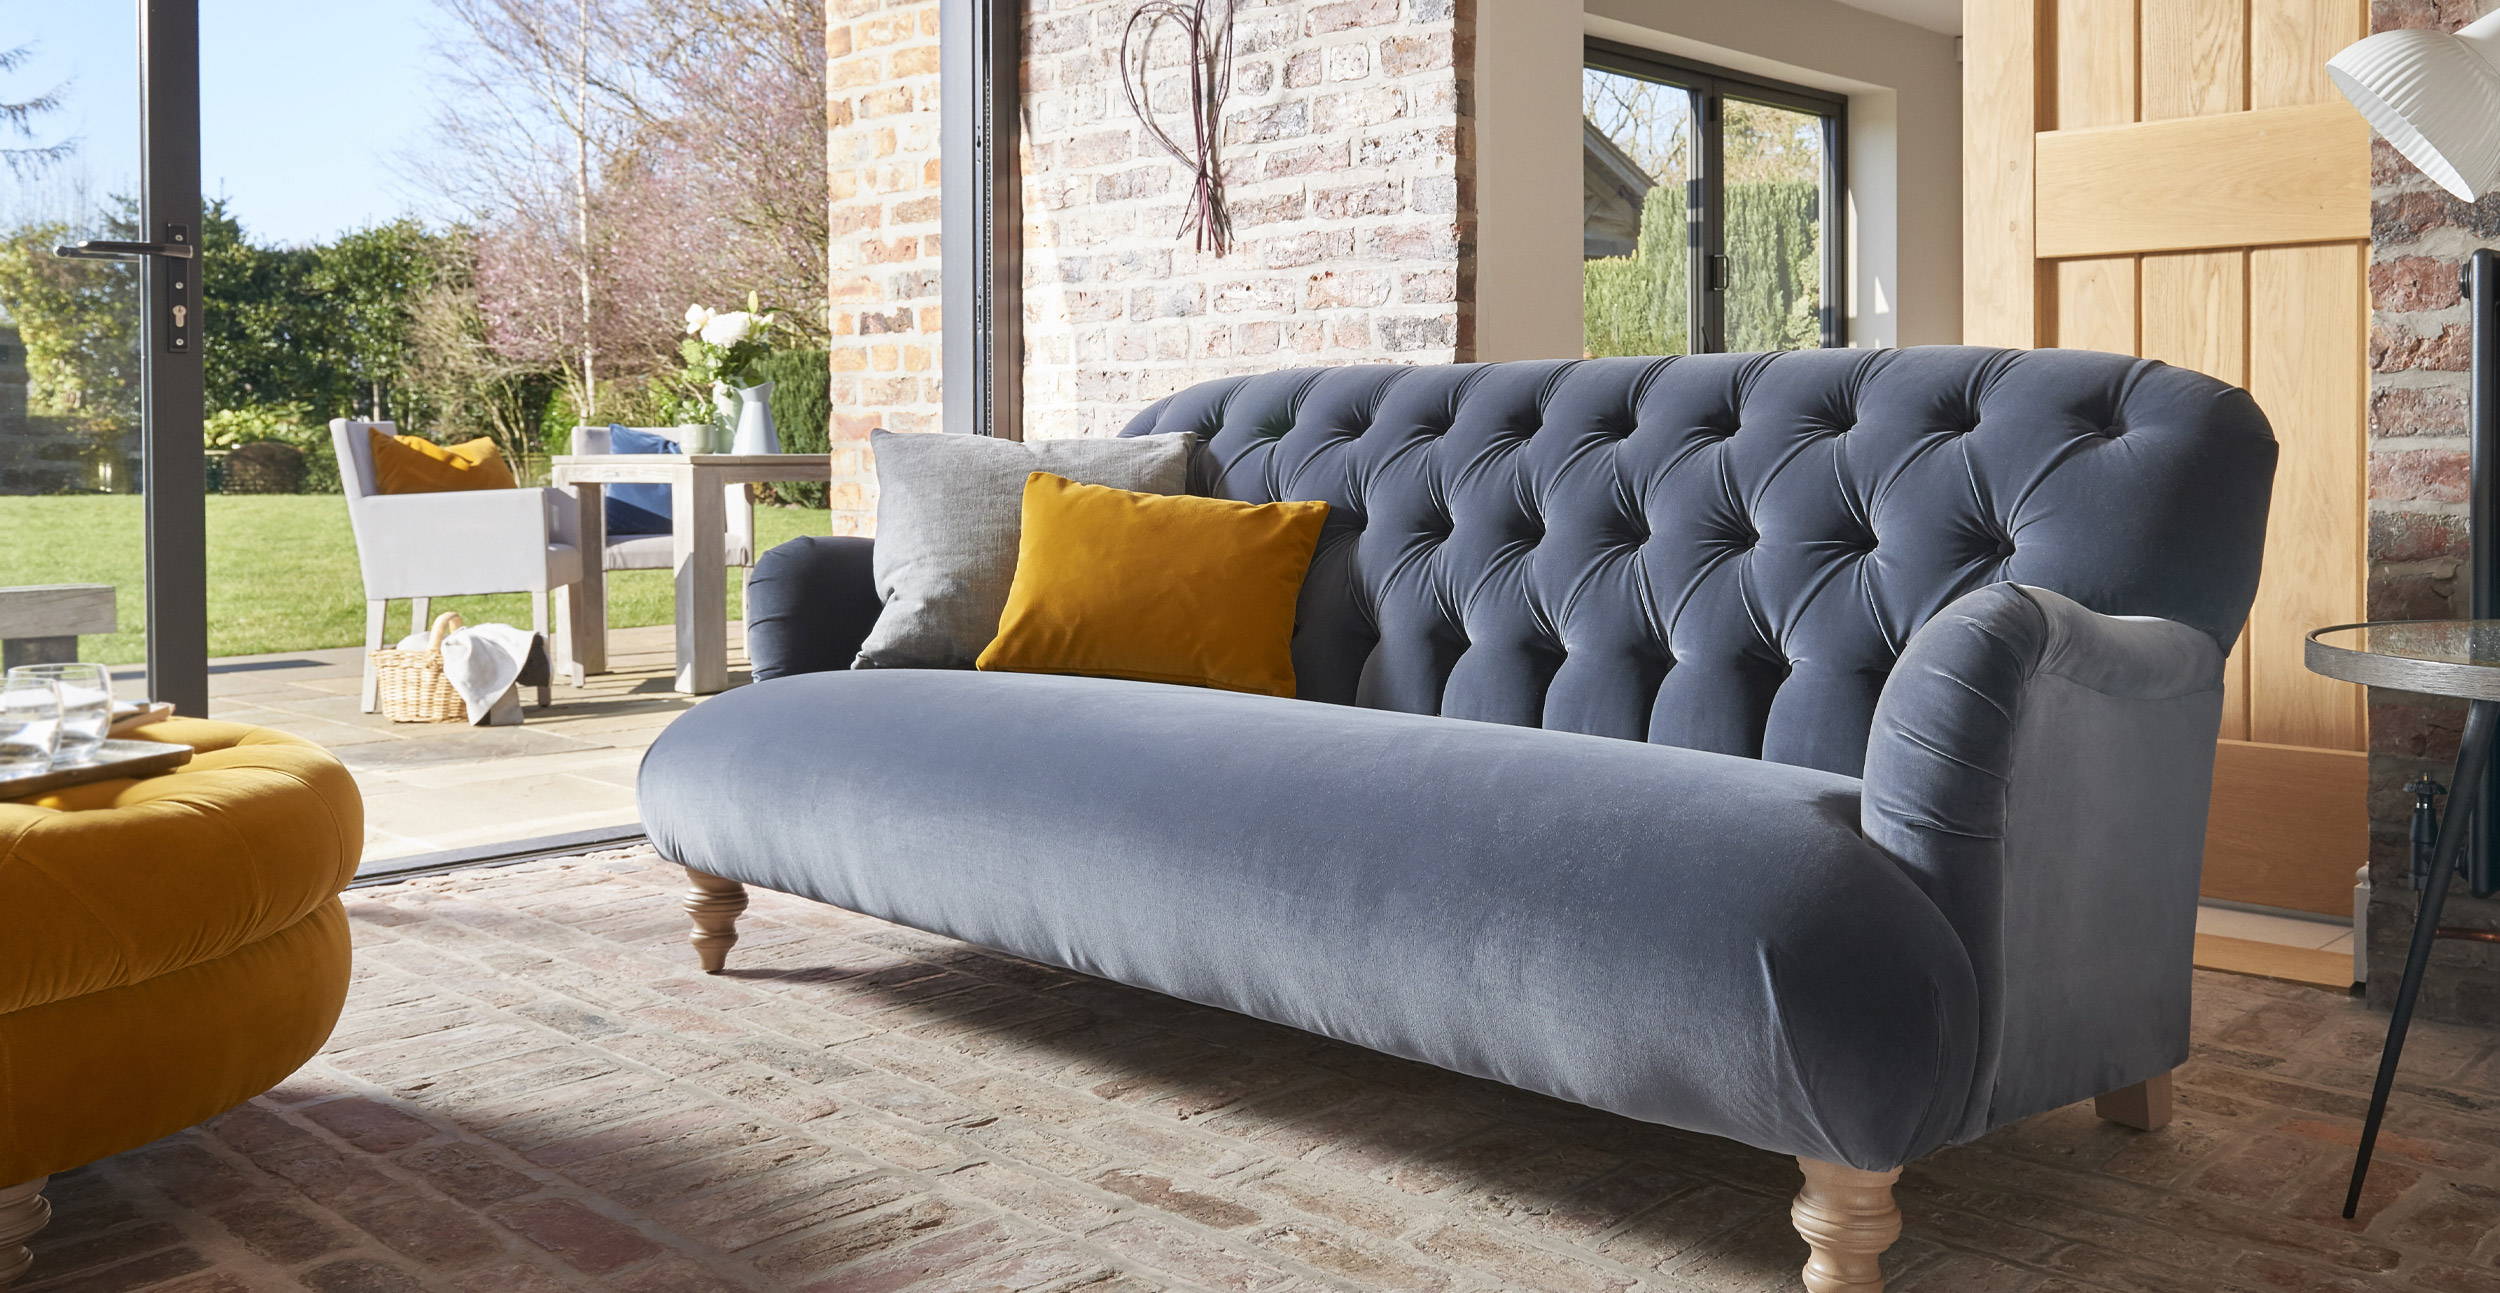 Buttoned Back Sofa - Choose A Fabric & Customise The Brioche At BF Home